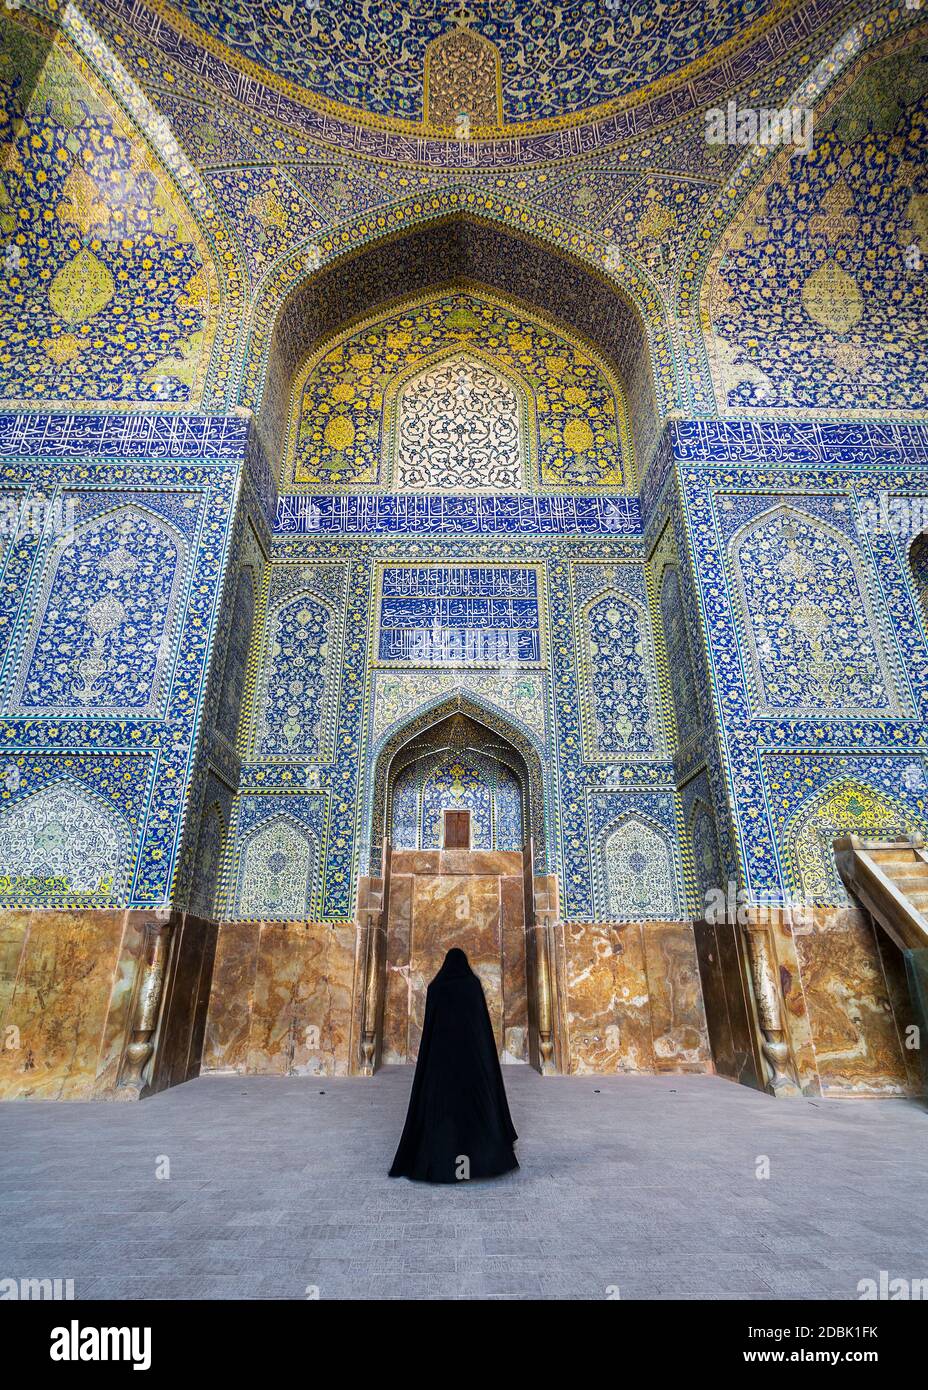 The Shah Mosque, also known as the Imam Mosque, is a mosque located in Isfahan, Iran. It is located on the south side of Naghsh-e Jahan Square. Stock Photo